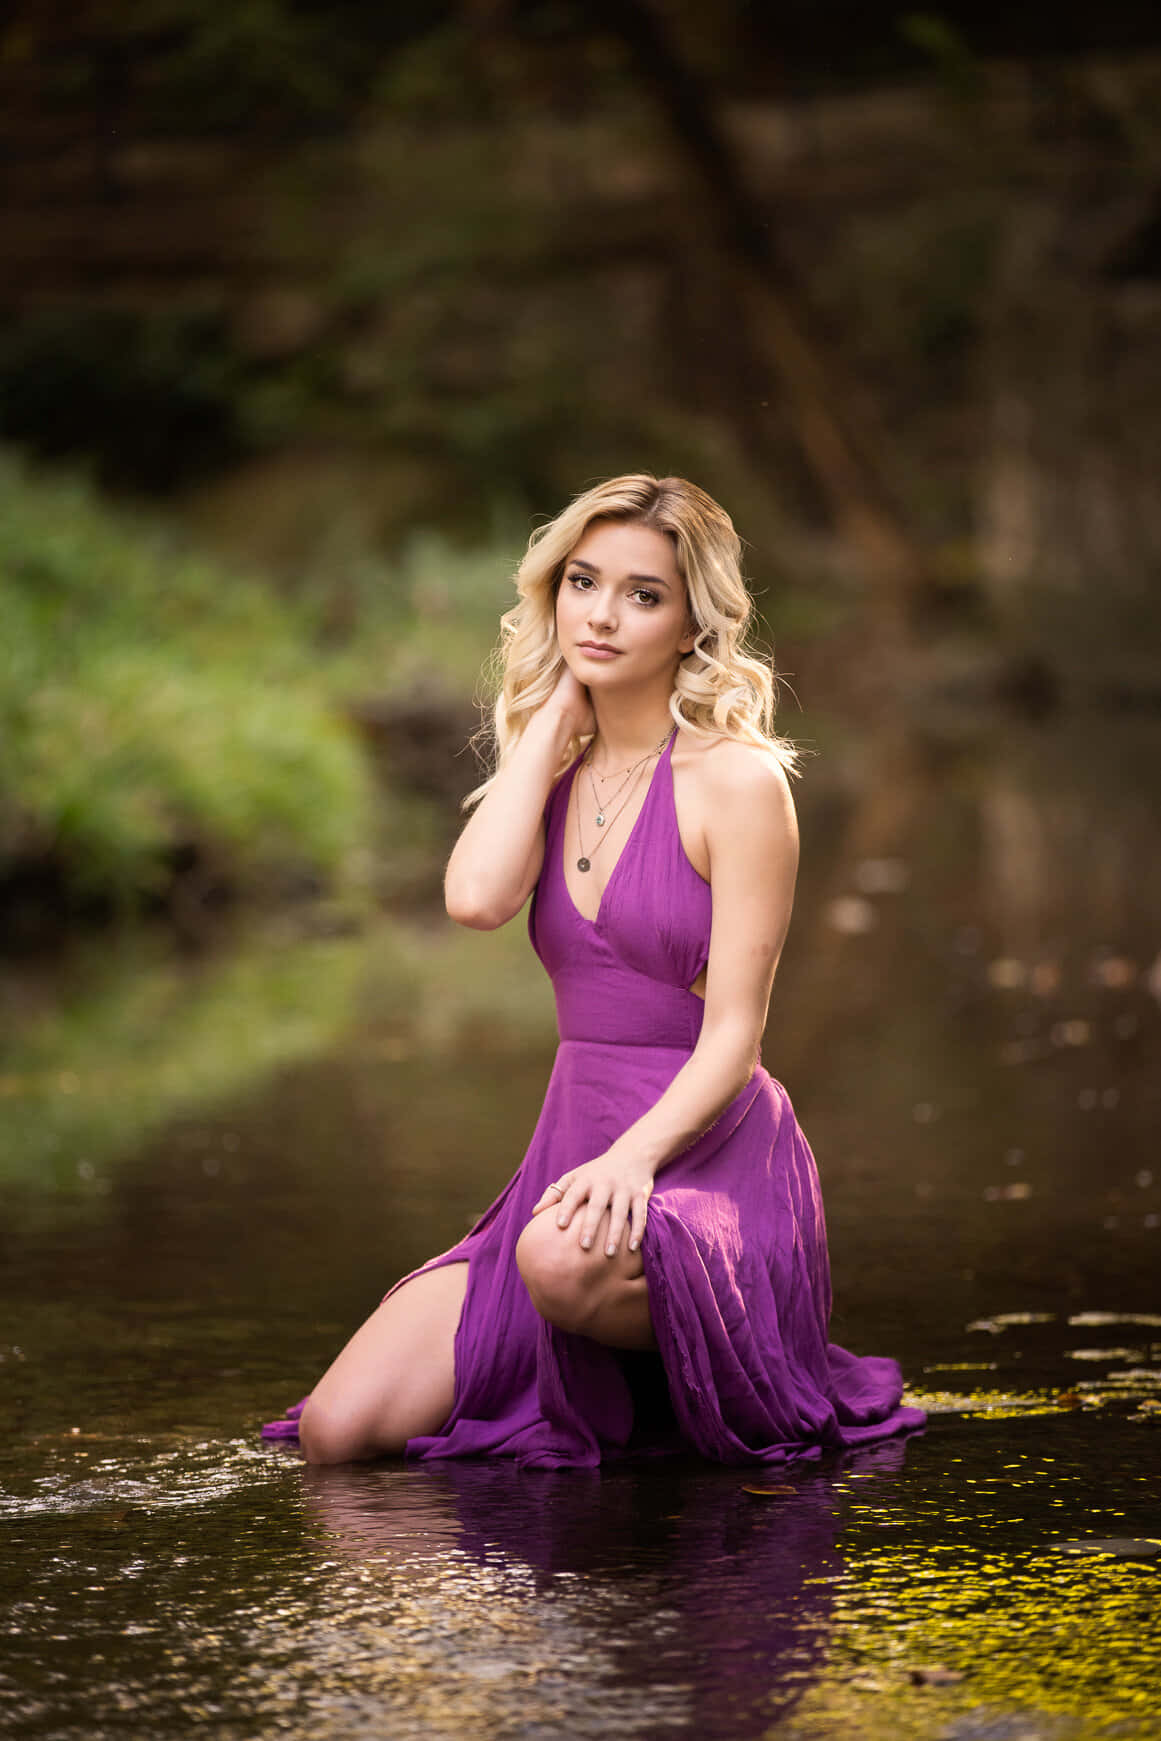 Senior Blonde Girl In Dress On River Pictures